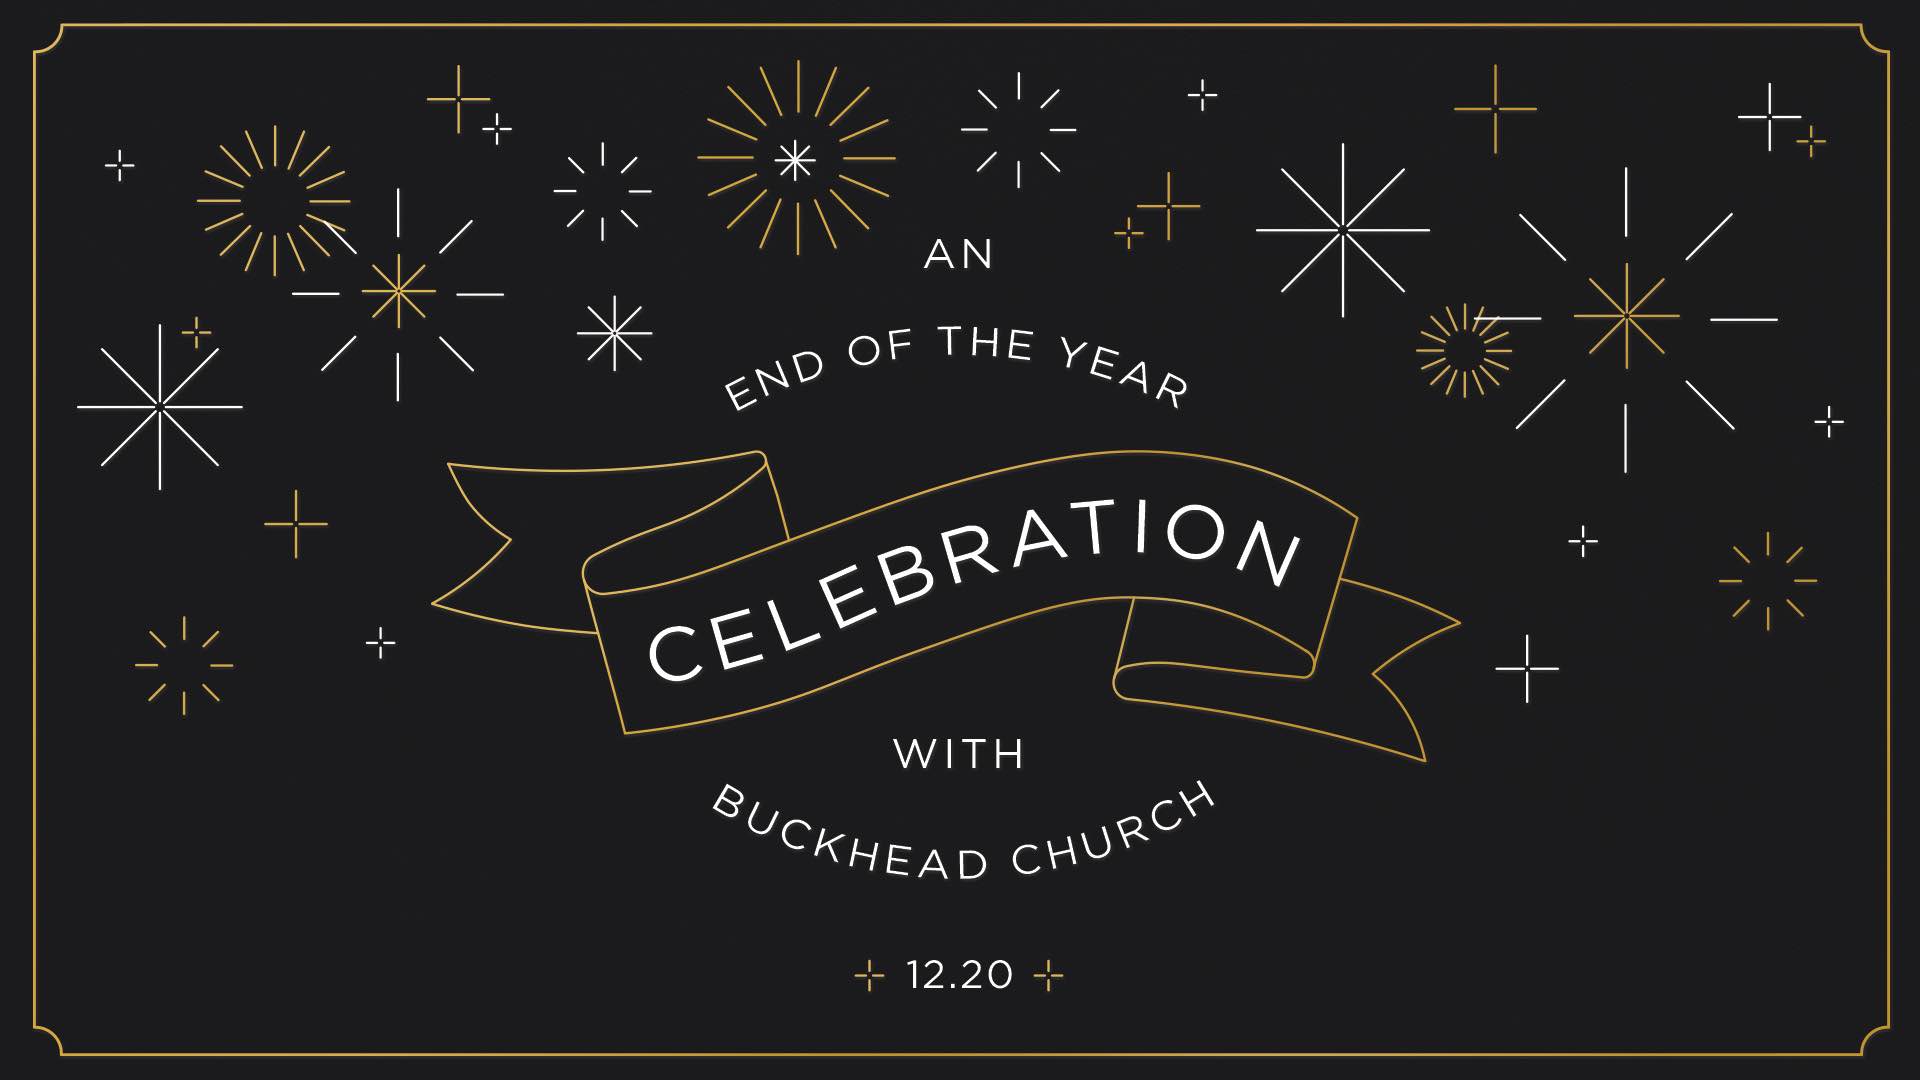 An End of the Year Celebration with Buckhead Church